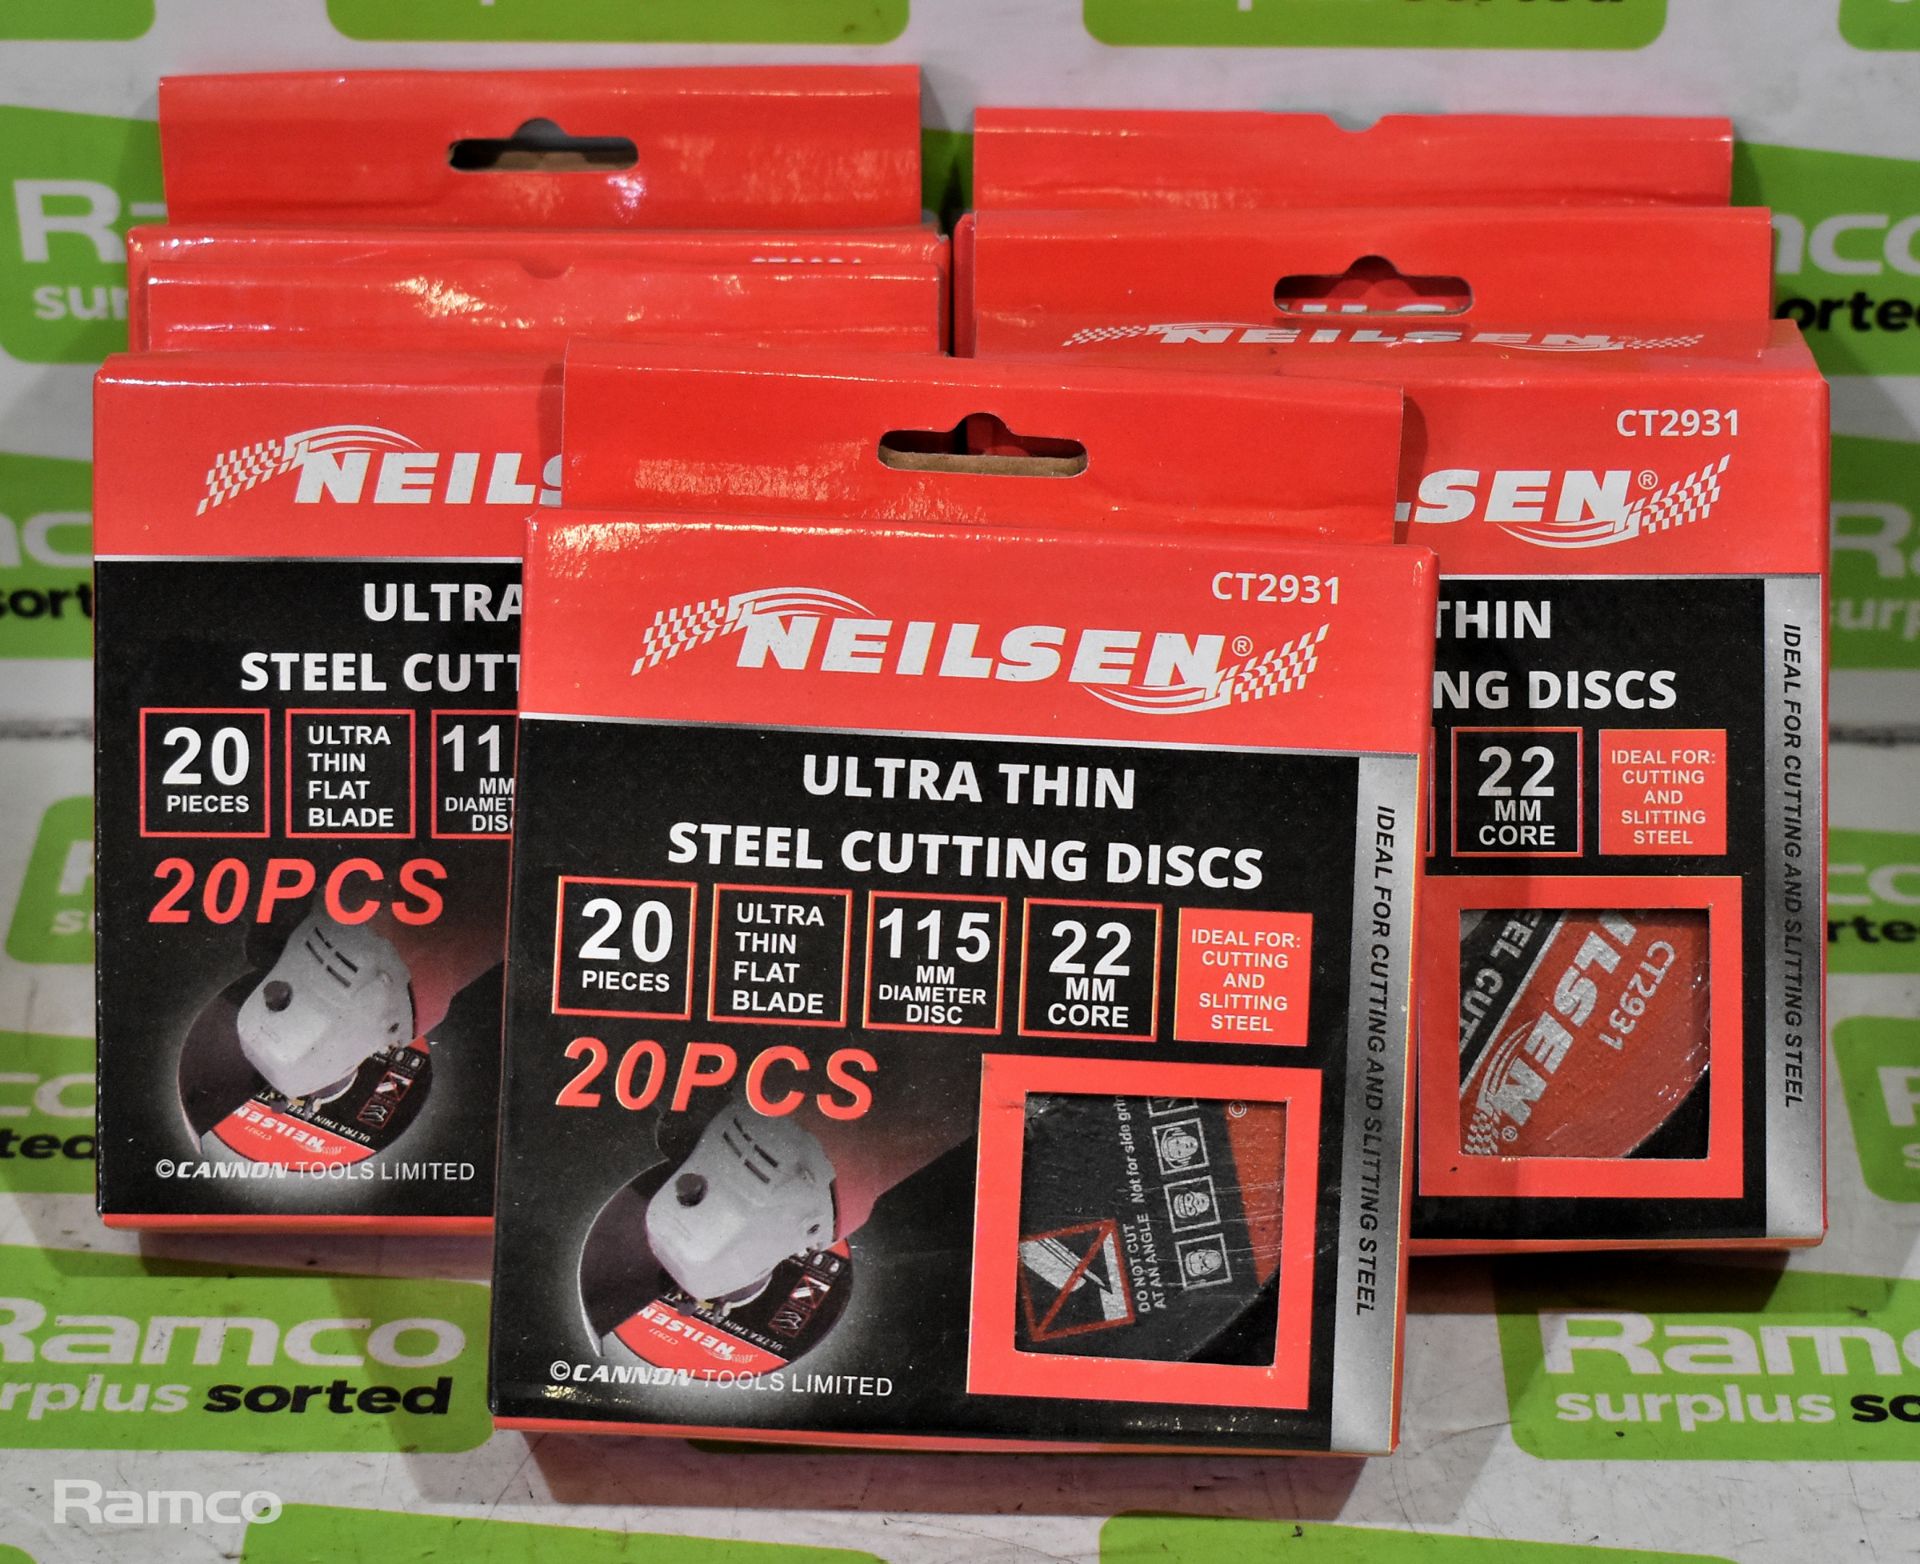 5x packs of Neilson steel ultra cutting discs (100pieces)